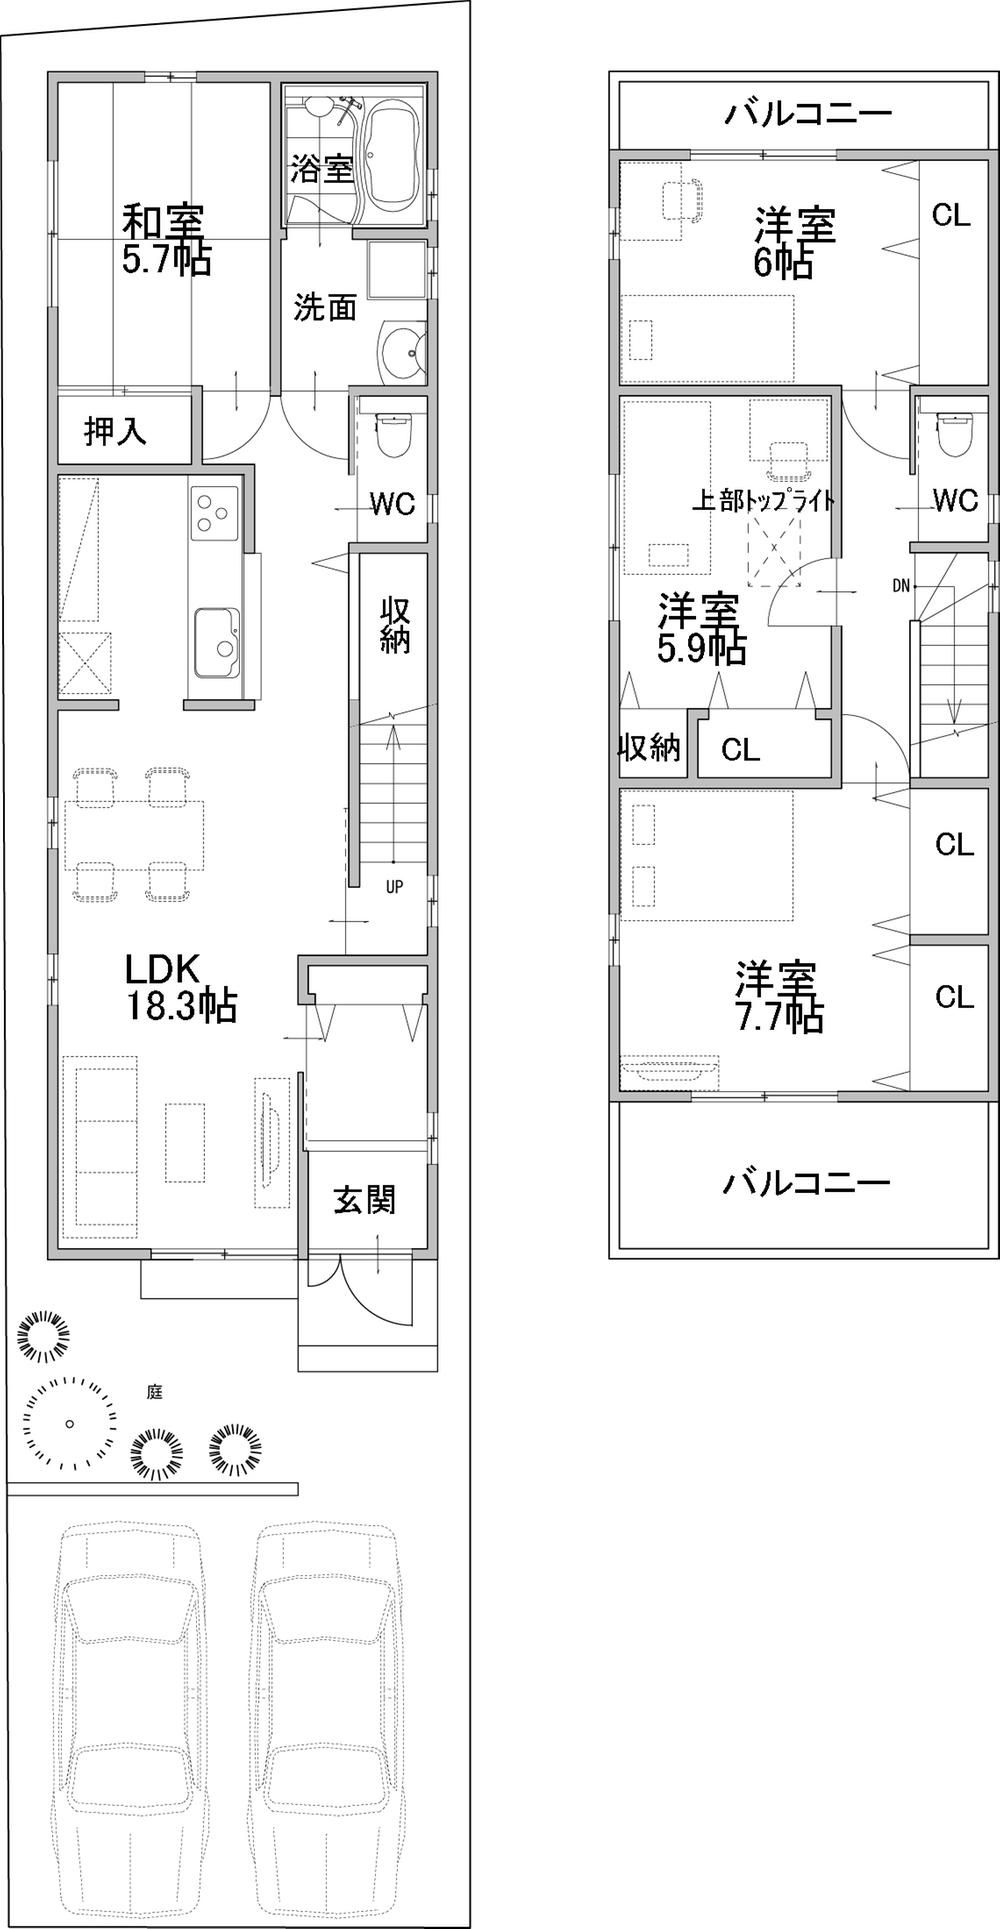 Building plan example (floor plan). Building plan example (west compartment building reference plan) 4LDK, Land price 22,280,000 yen, Land area 119.38 sq m , Building price 20,520,000 yen, Building area 108.11 sq m